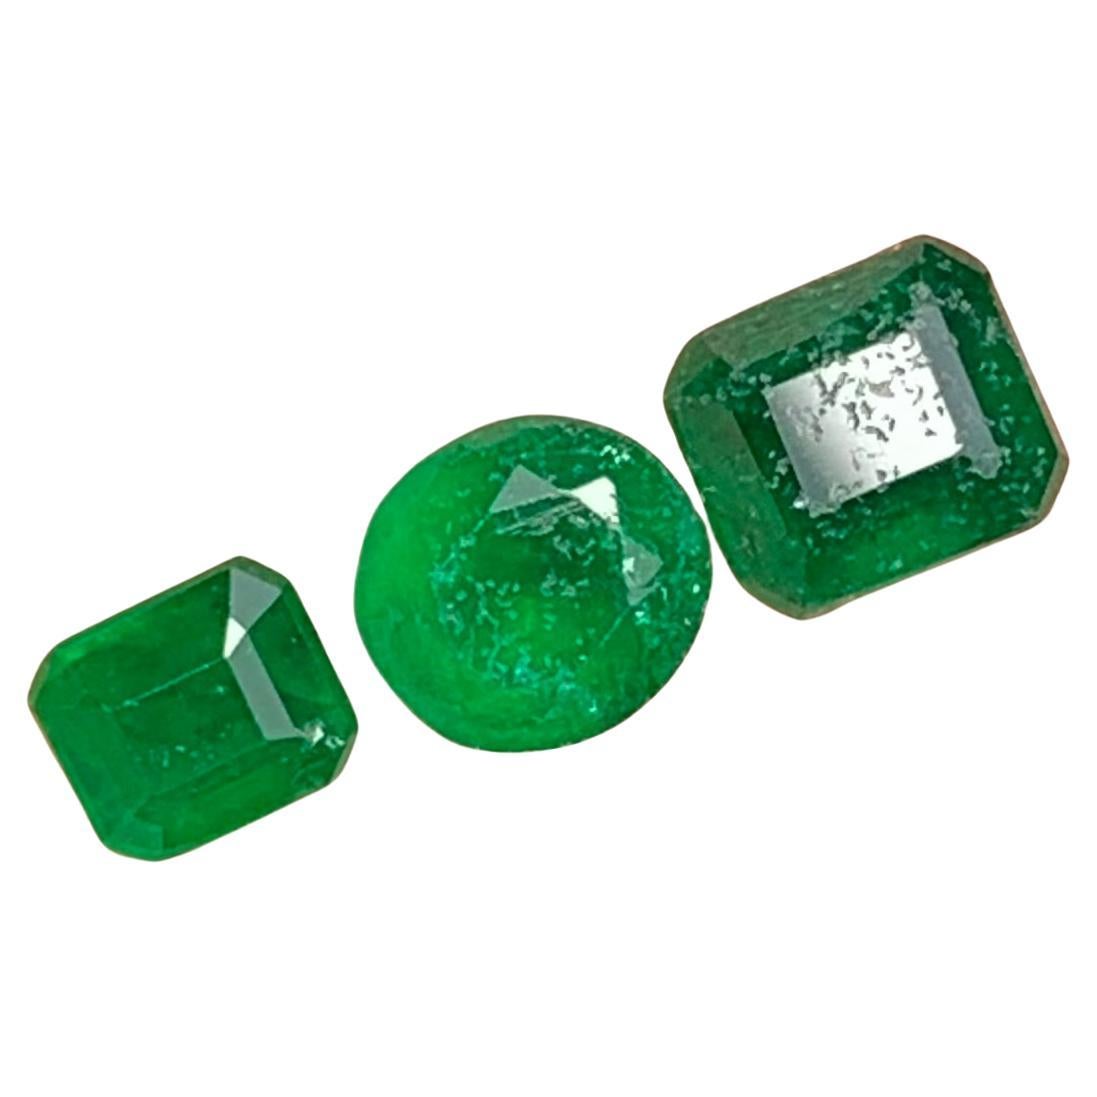 1.55 Carat Amazing Natural Loose Emerald Set For Jewellery Making 